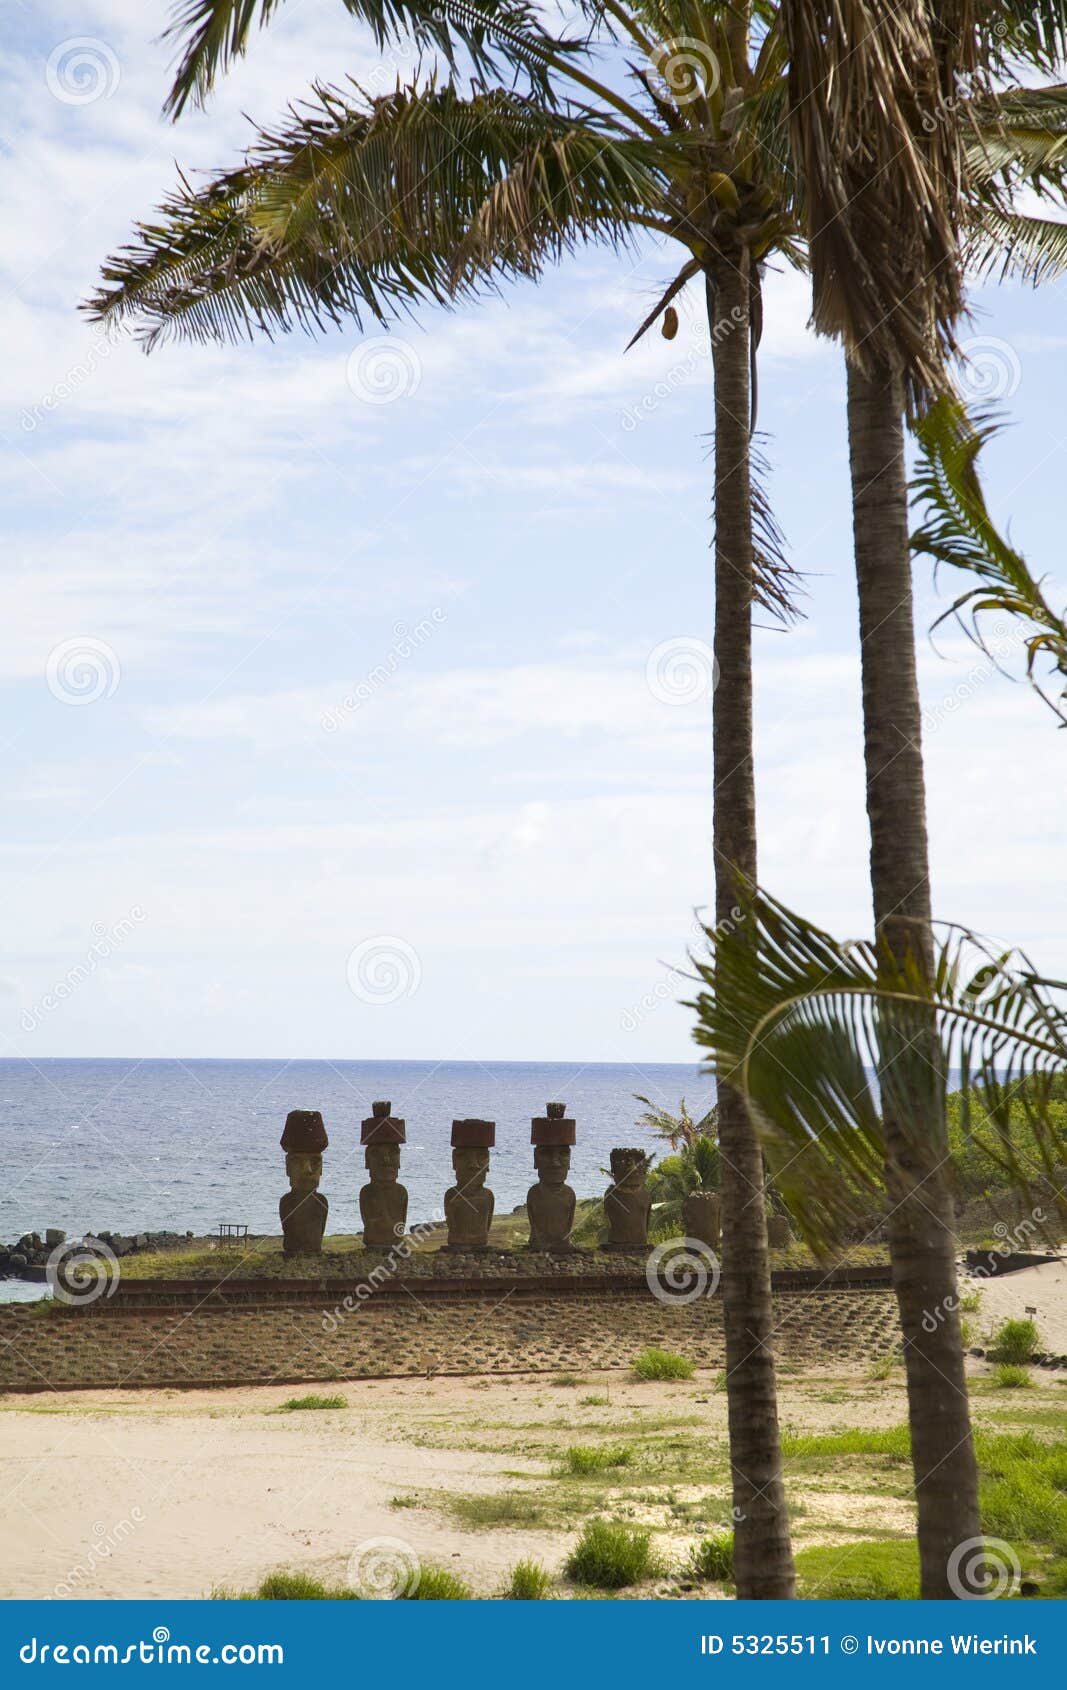 easter island with palmtrees and statues